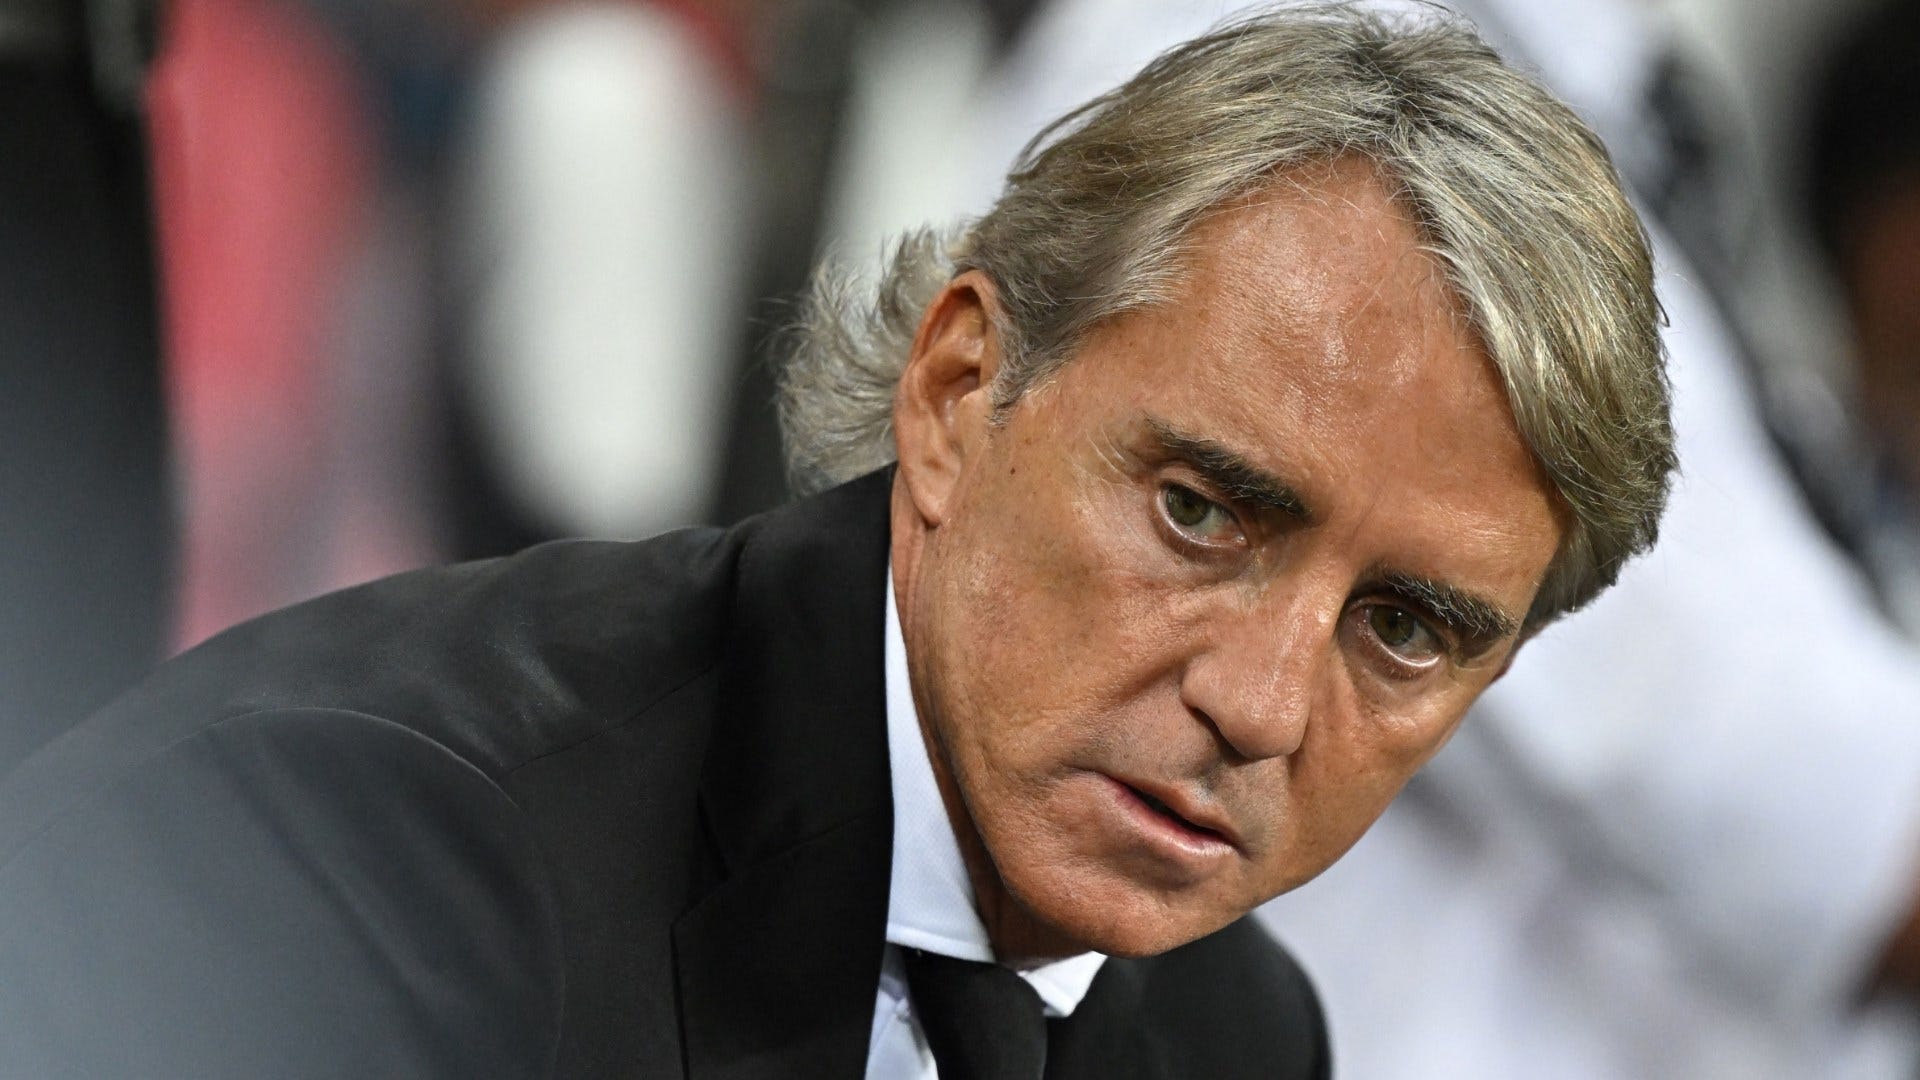 Italian Football Federation exploring legal action against Roberto Mancini after ex-national team manager left suddenly to move to Saudi Arabia